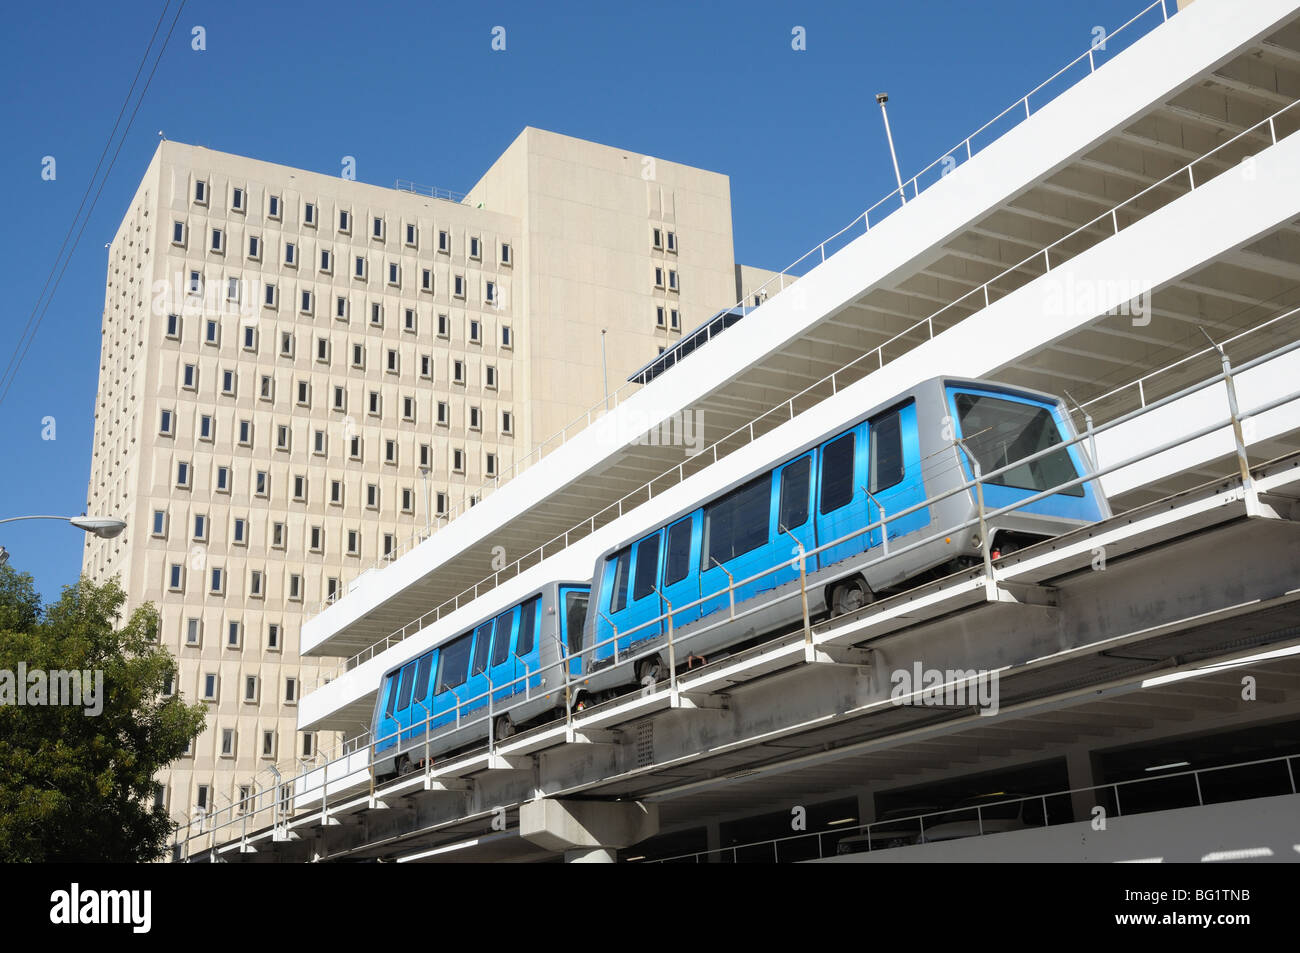 The fully automated Miami downtown train system Stock Photo